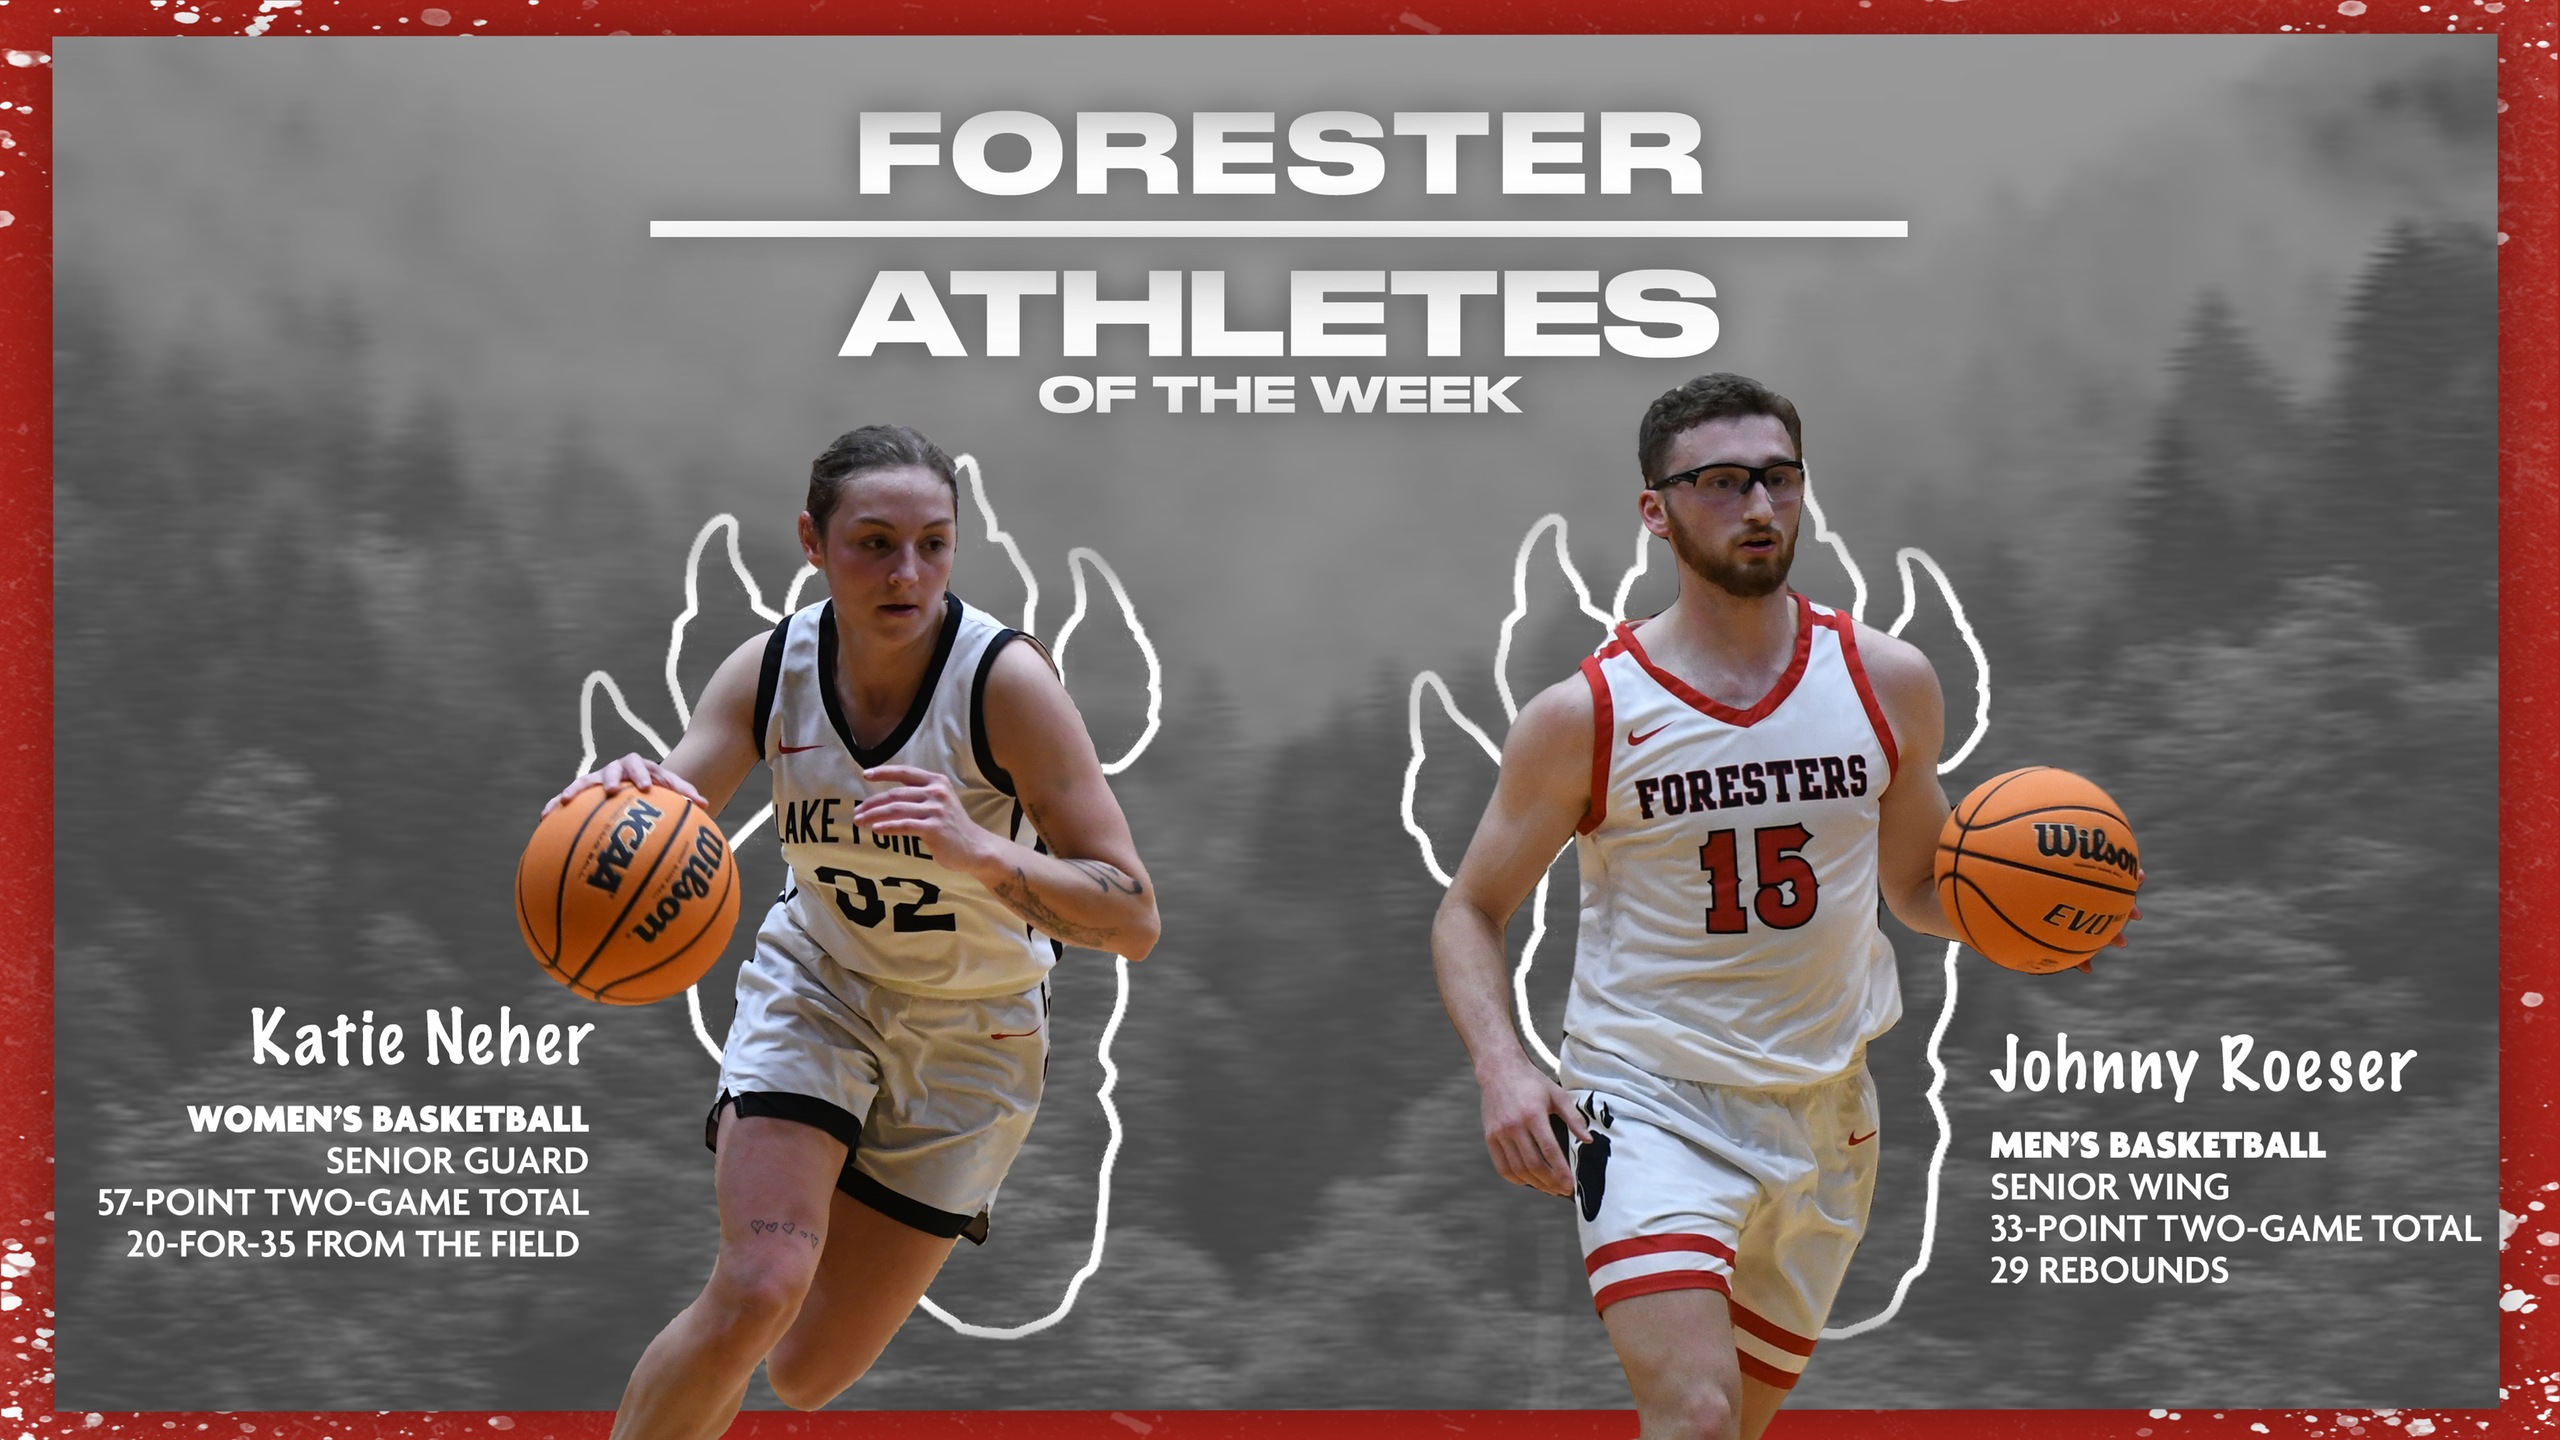 Forester Athletes the Week: Dec. 21